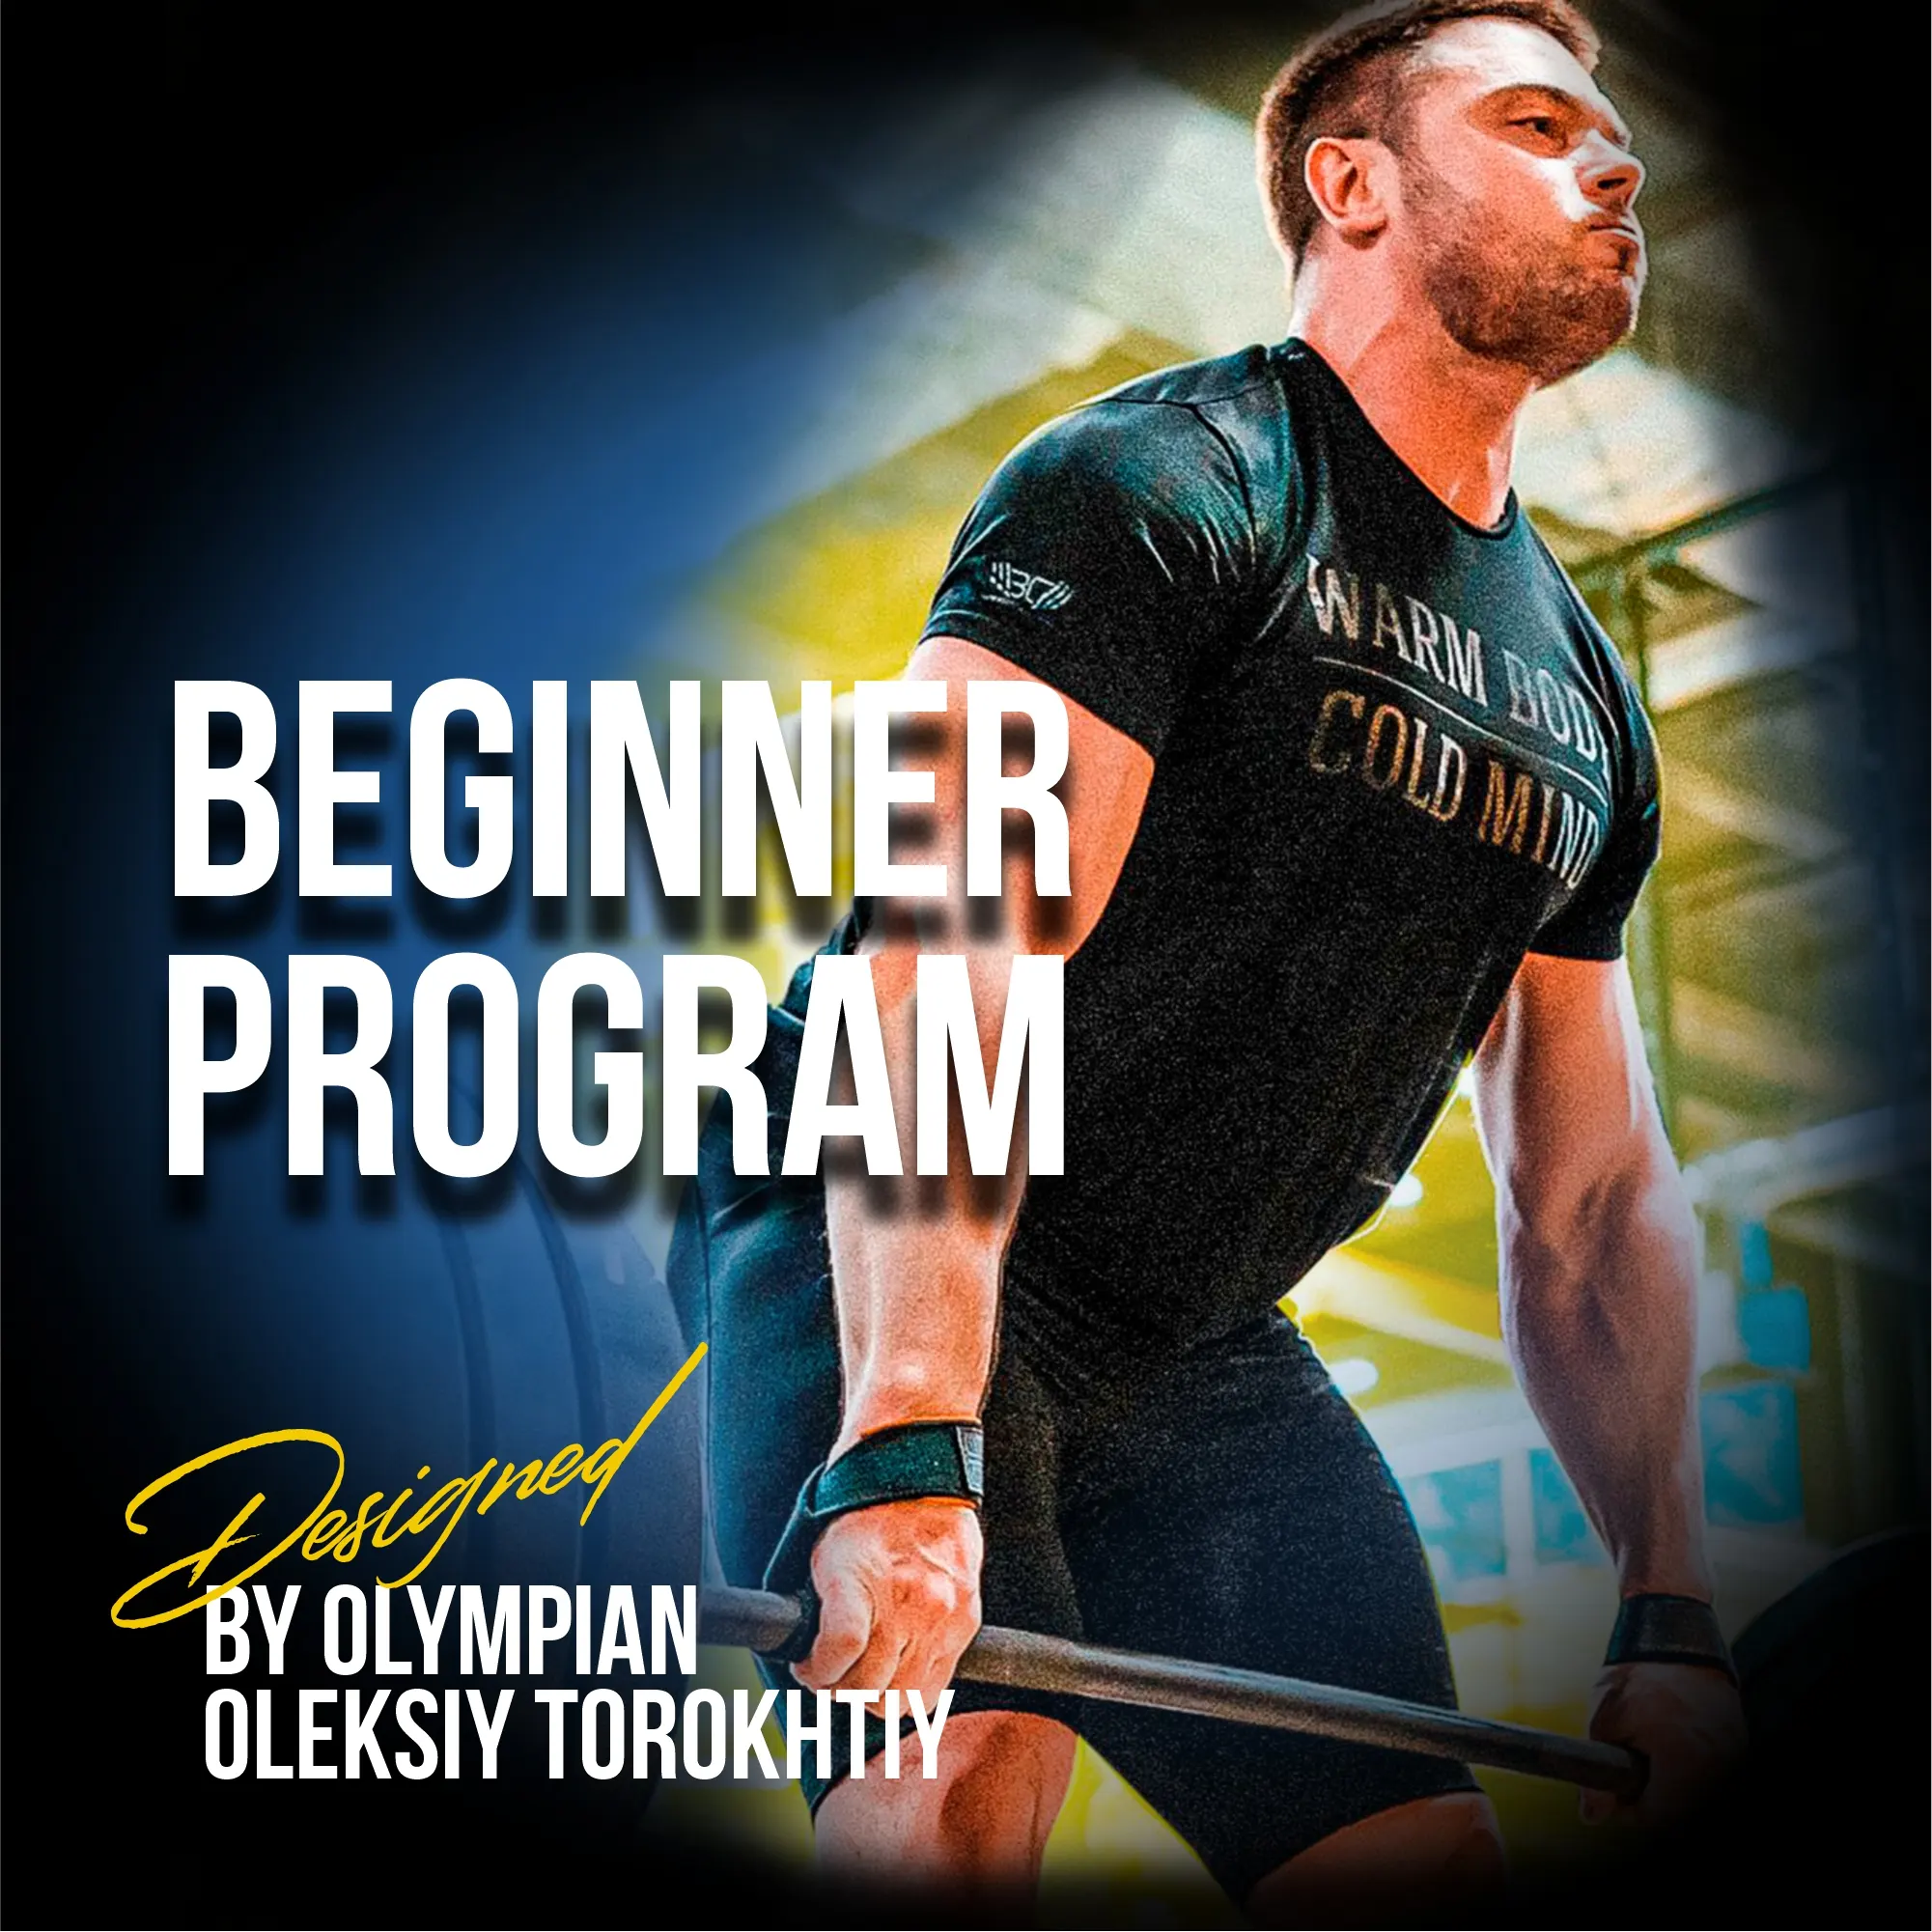 Olympic Weightlifting Program
For Beginners